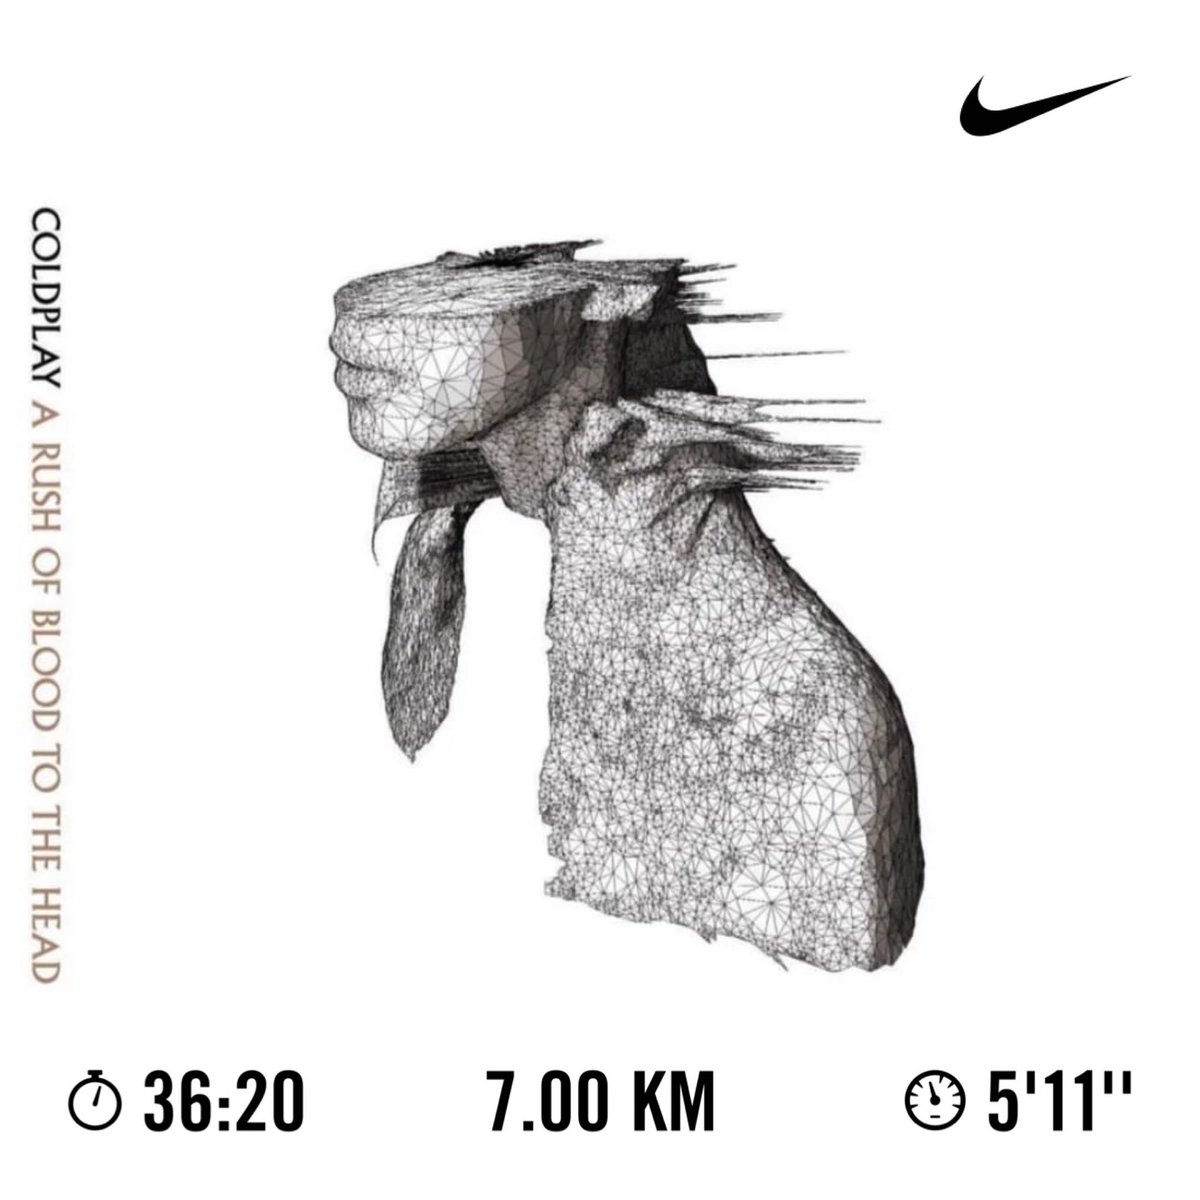 A RUSH OF BLOOD TO THE HEAD // Coldplay // 26 • 08 • 2002
#ARushOfBloodToTheHead20 #Coldplay #NRC #Running #NikeRunning #ComeRunWithUs #JustDoIt